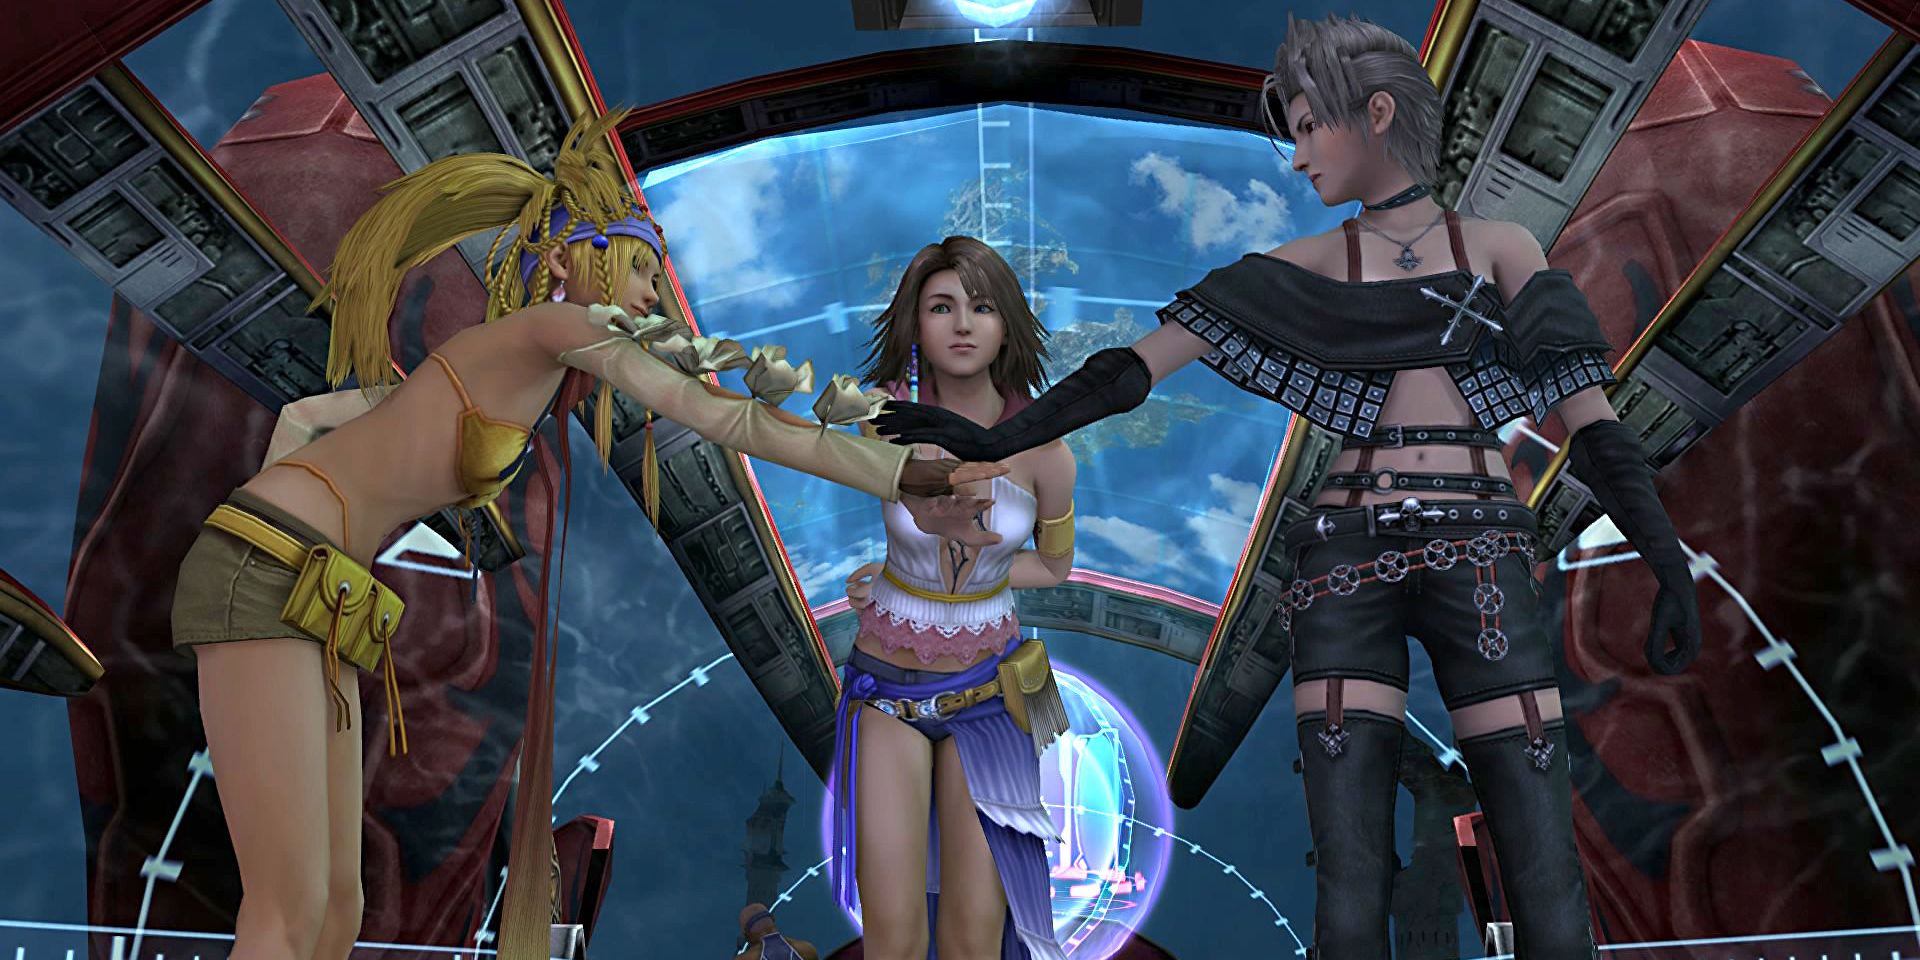 Rikku, Yuna, and Paine pump themselves up for adventure in Final Fantasy X-2